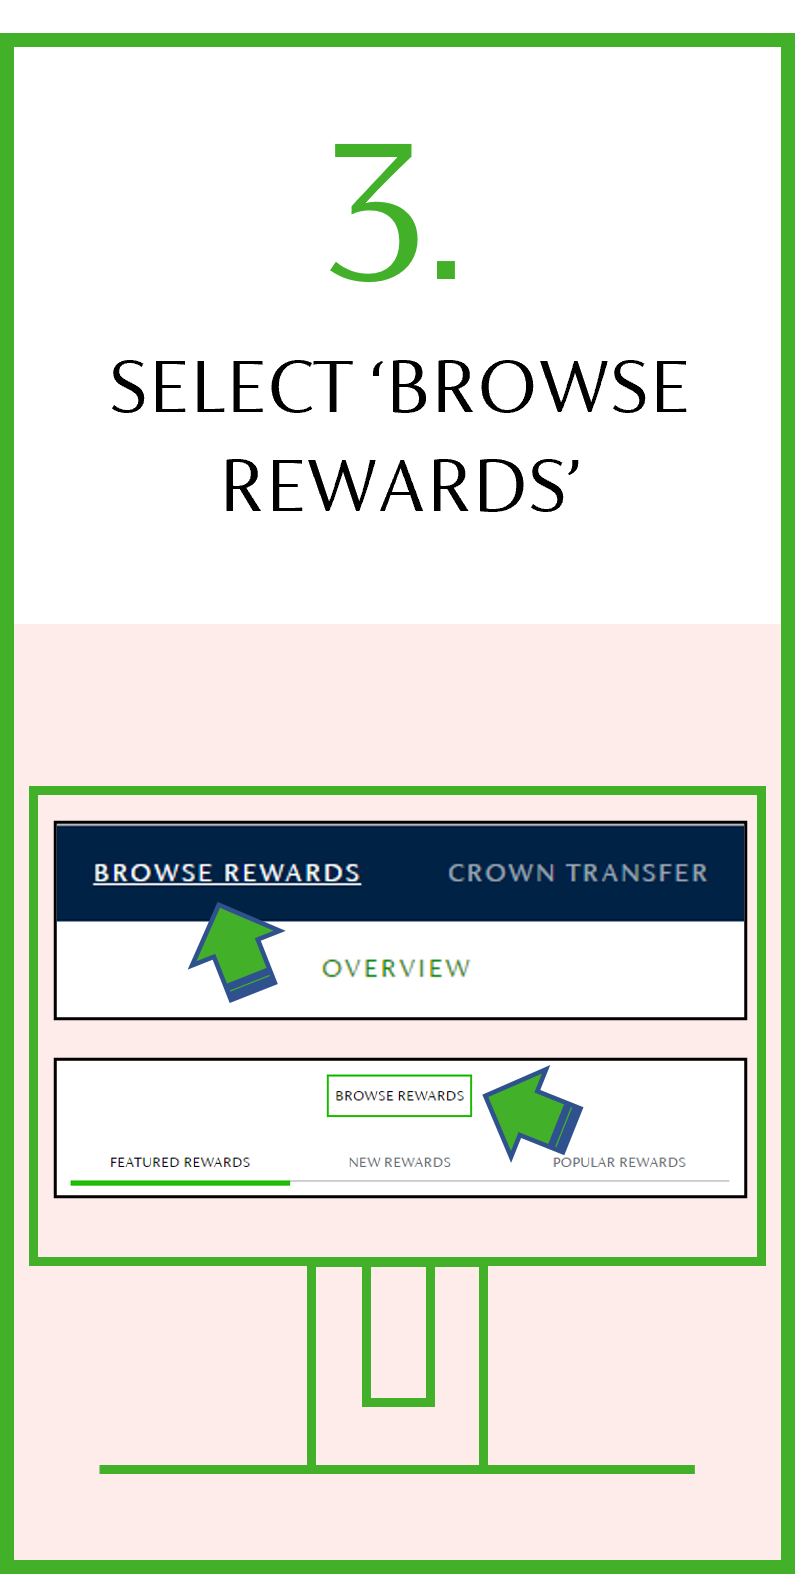 transfer-your-crowns-step-2